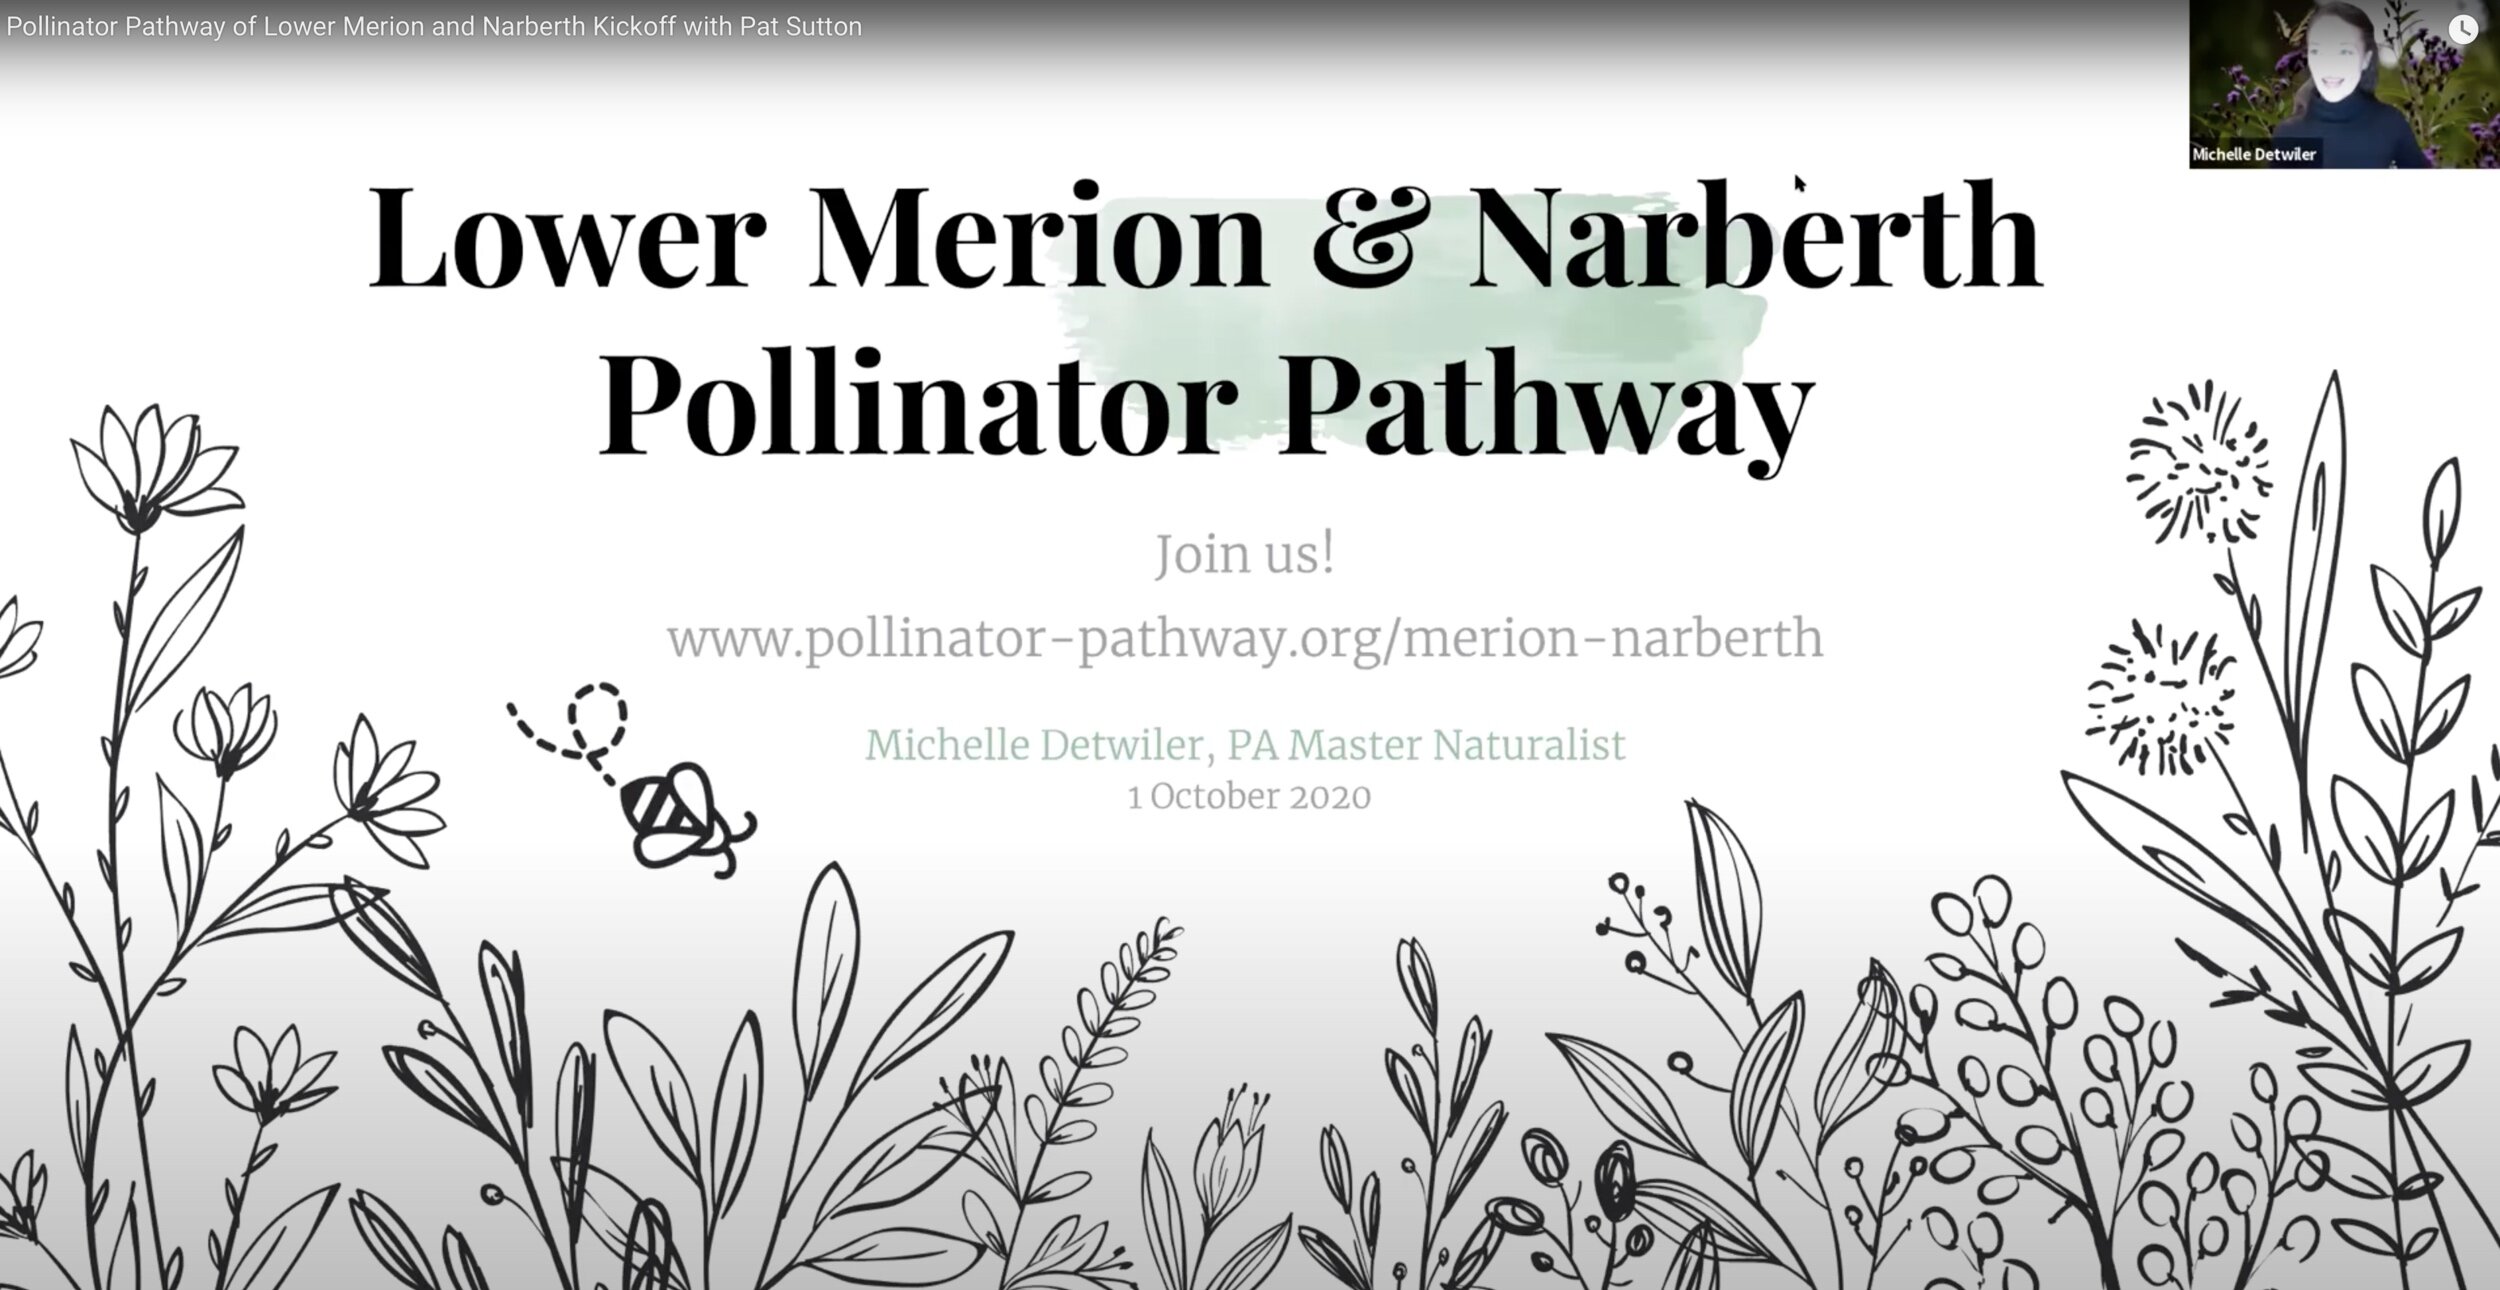 View my recent talk about the new Lower Merion and Narberth Pollinator Pathway here (1 October 2020).  The talk starts at minute 4:35.  Wildlife gardener and naturalist Pat Sutton follows.